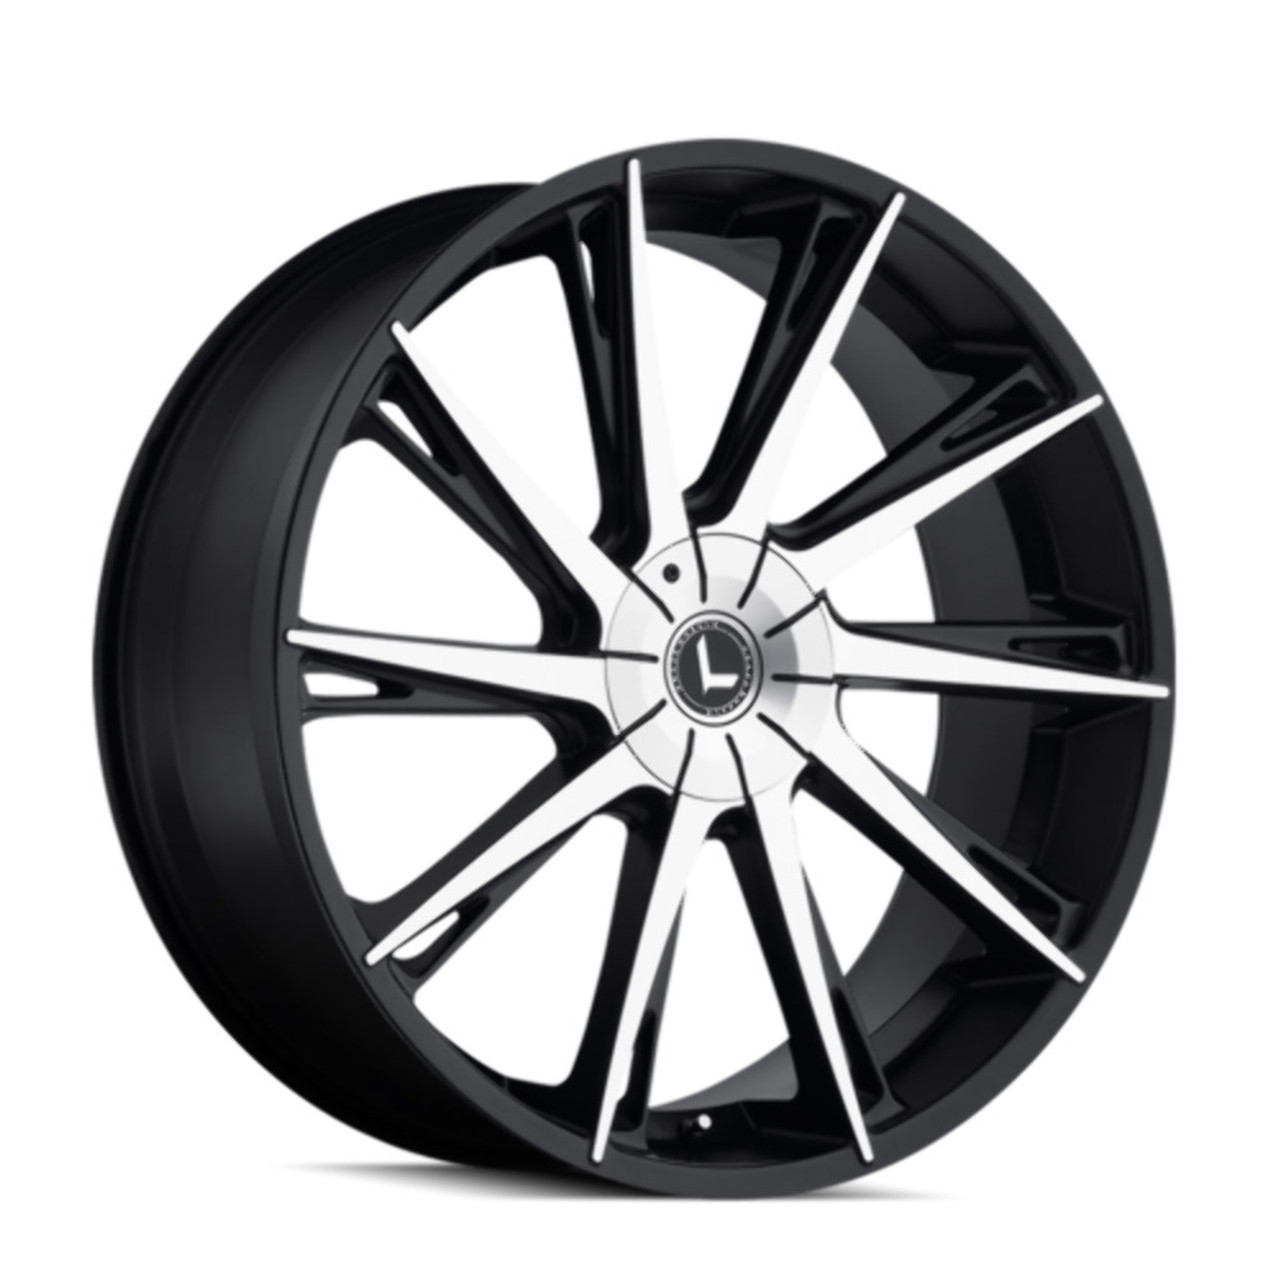 24" Kraze Swagg 24x9.5 Black Machined 6x135 6x5.5 Wheel 30mm For Ford Chevy GMC